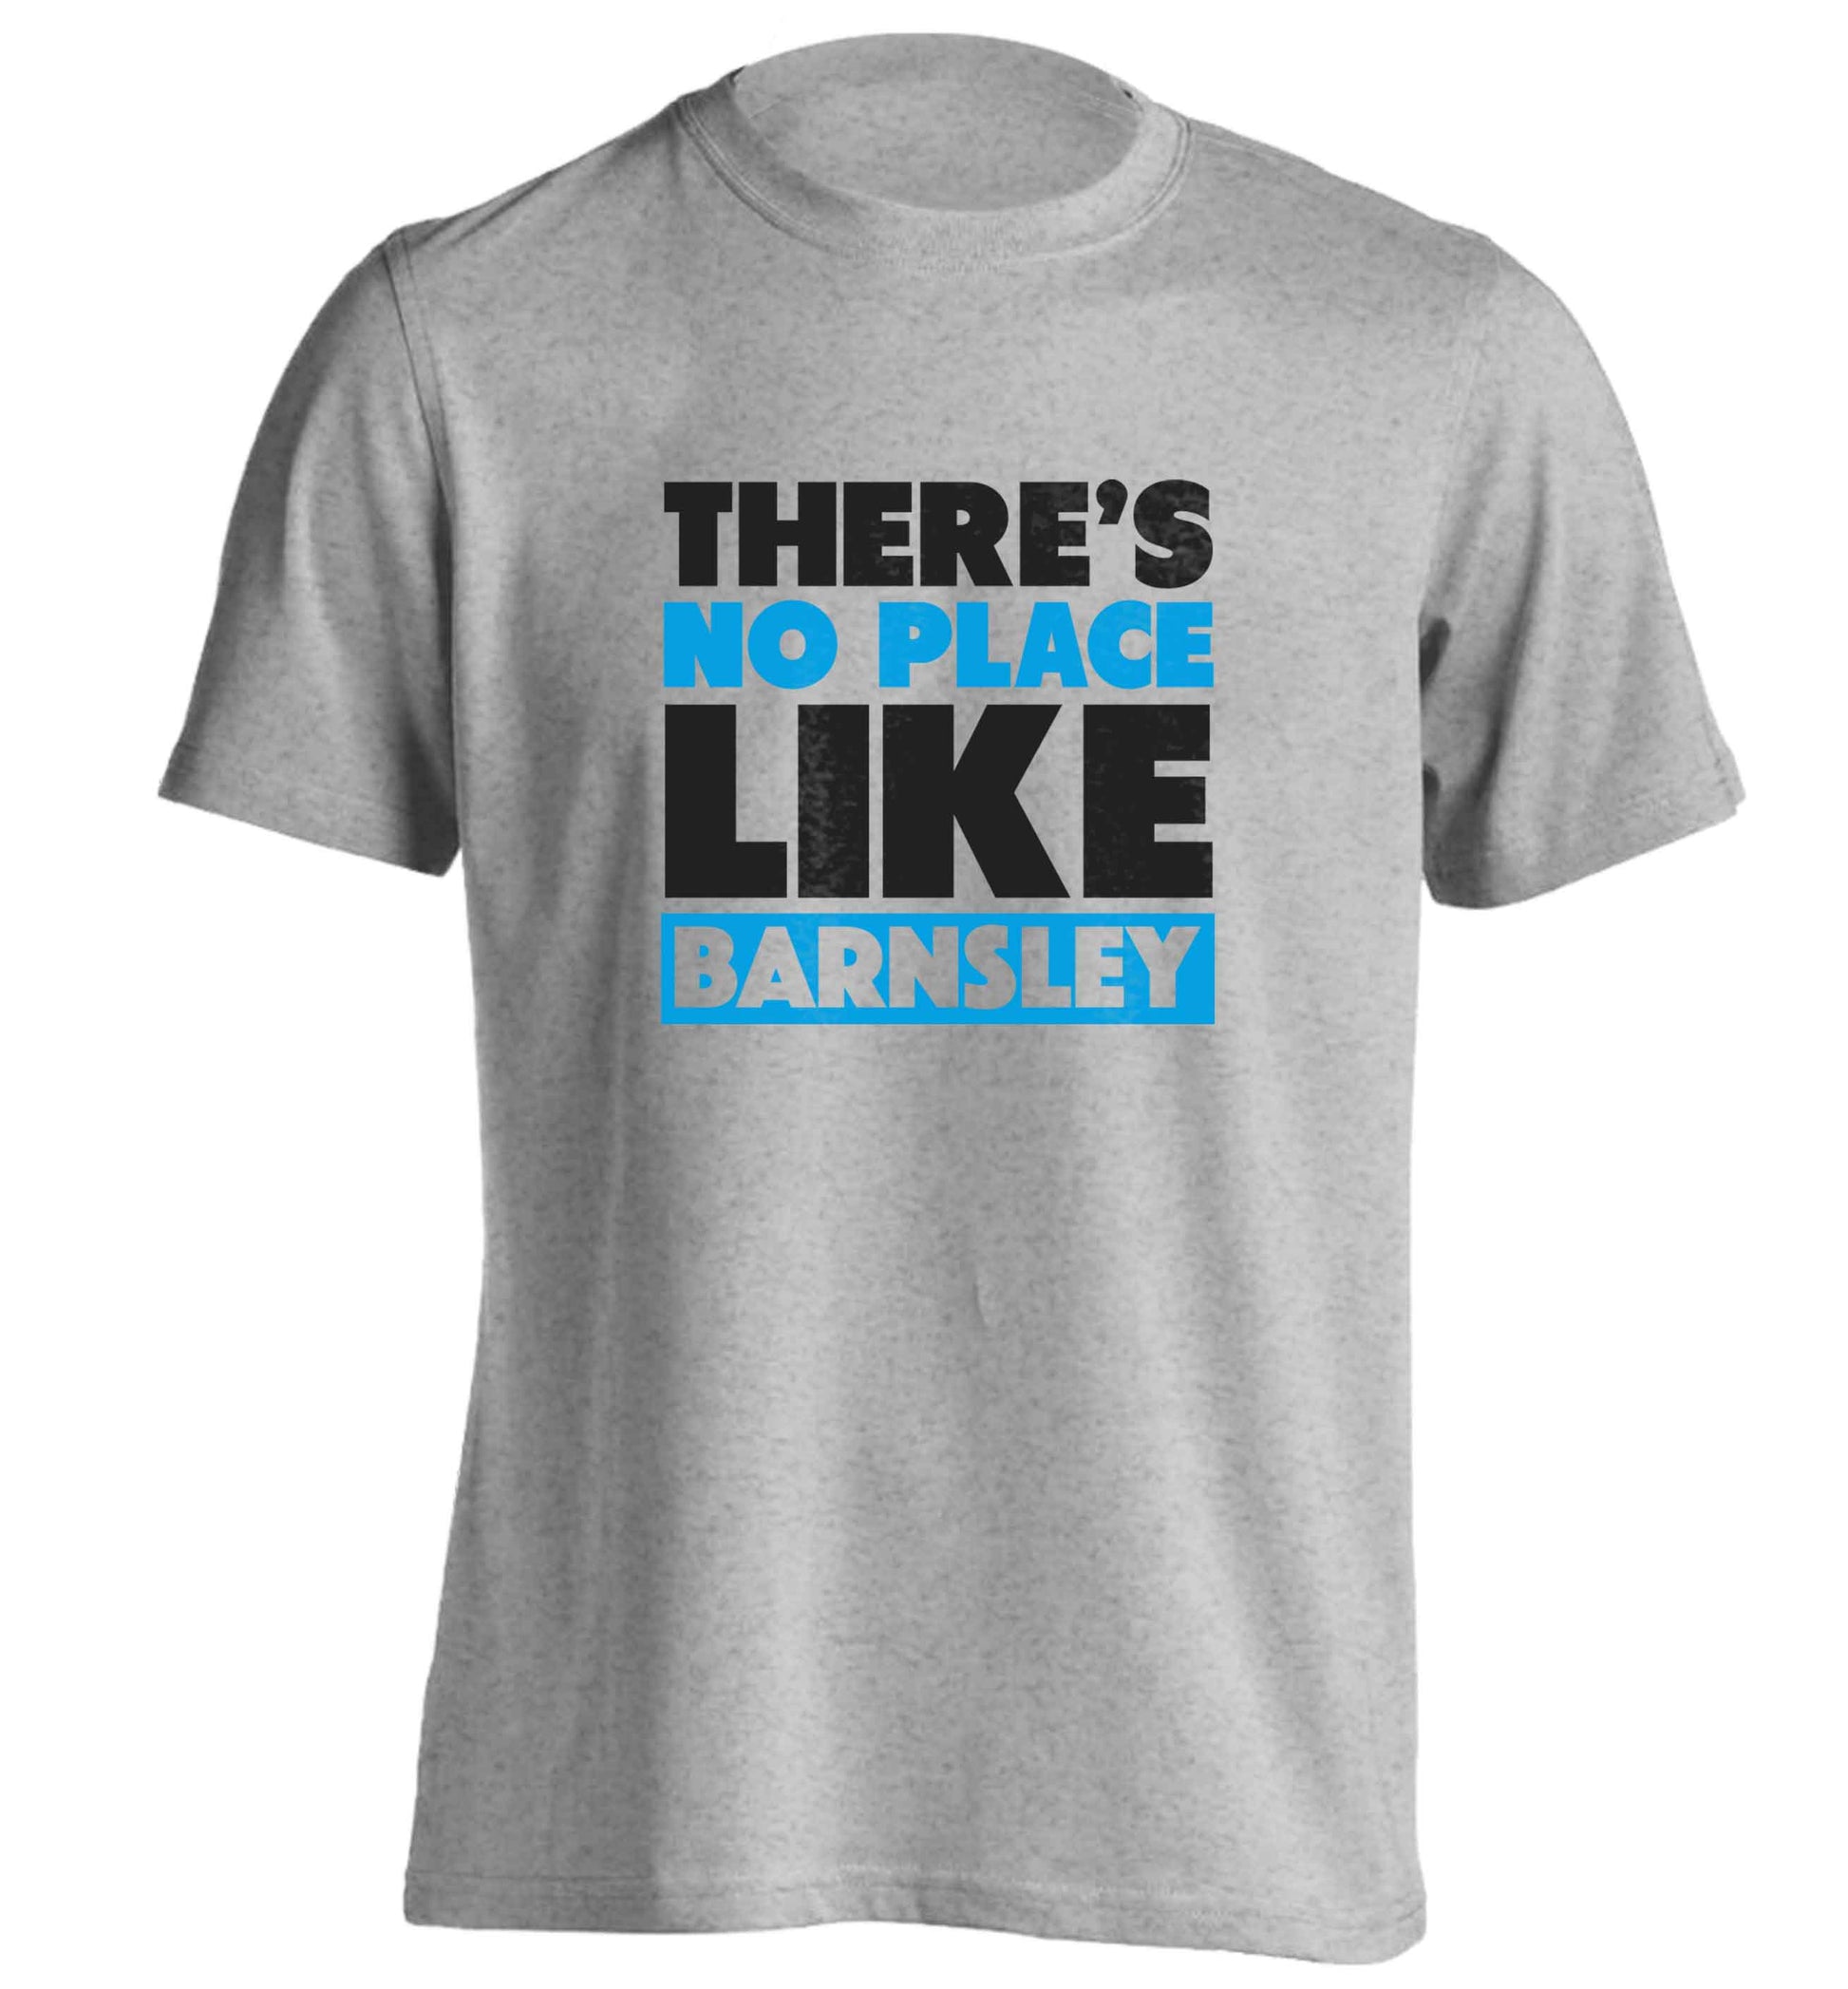 There's No Place Like Barnsley adults unisex grey Tshirt 2XL